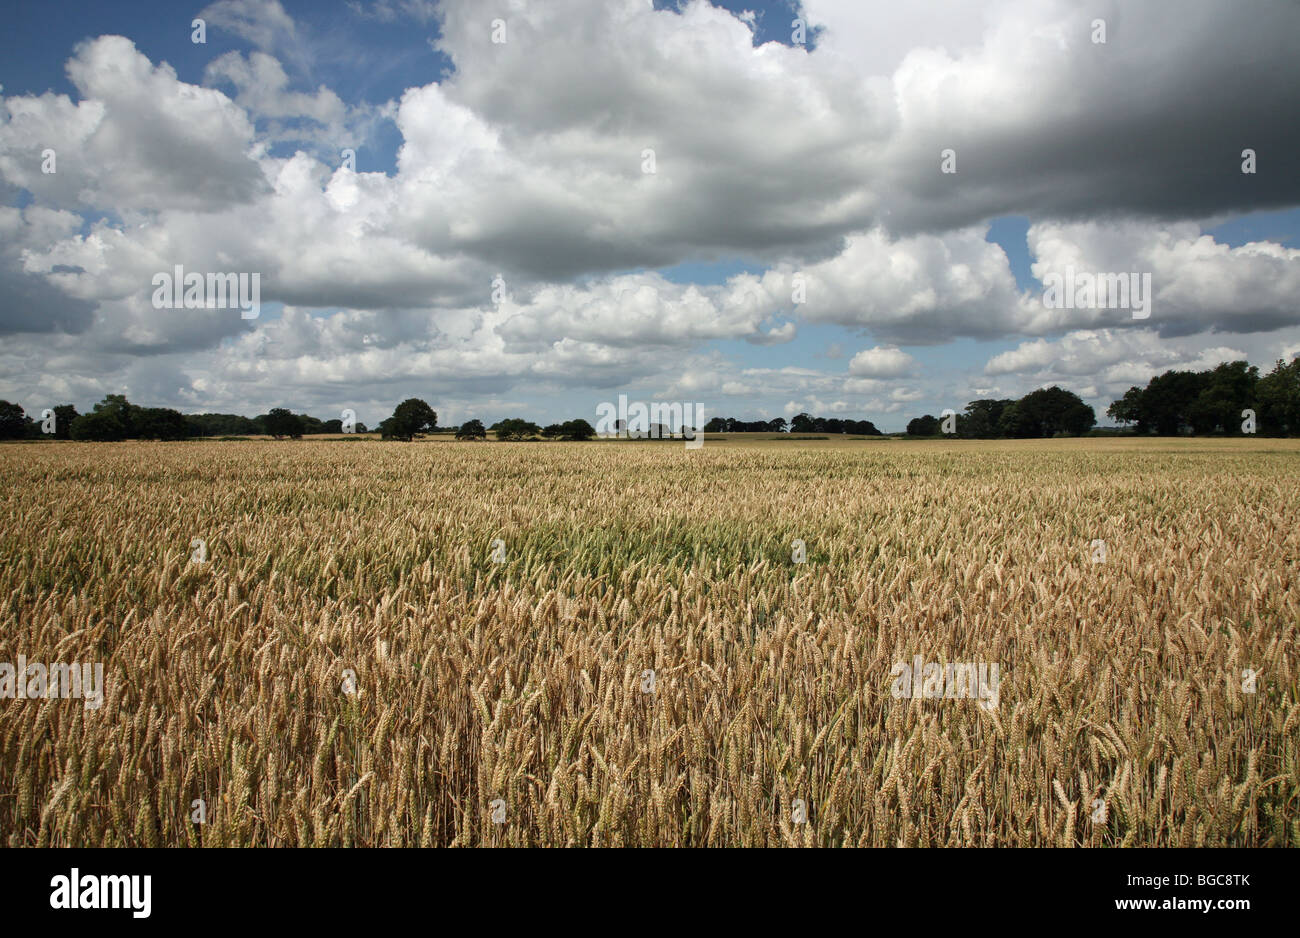 A Barley field in Cheshire England on a summers day with blue sky and white clouds Stock Photo